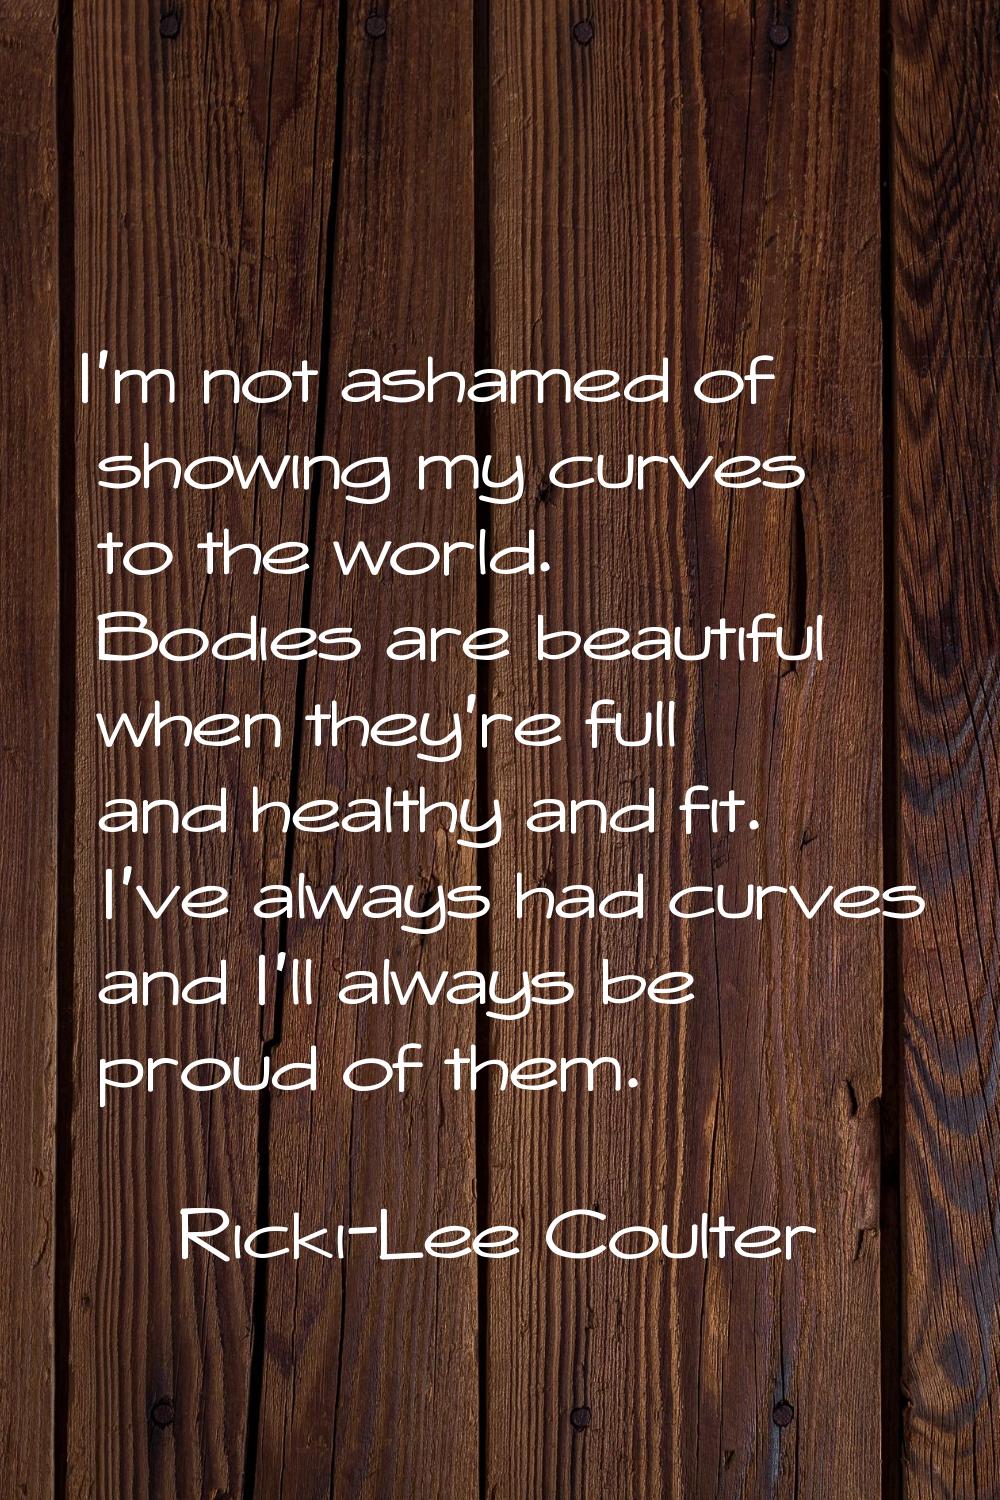 I'm not ashamed of showing my curves to the world. Bodies are beautiful when they're full and healt